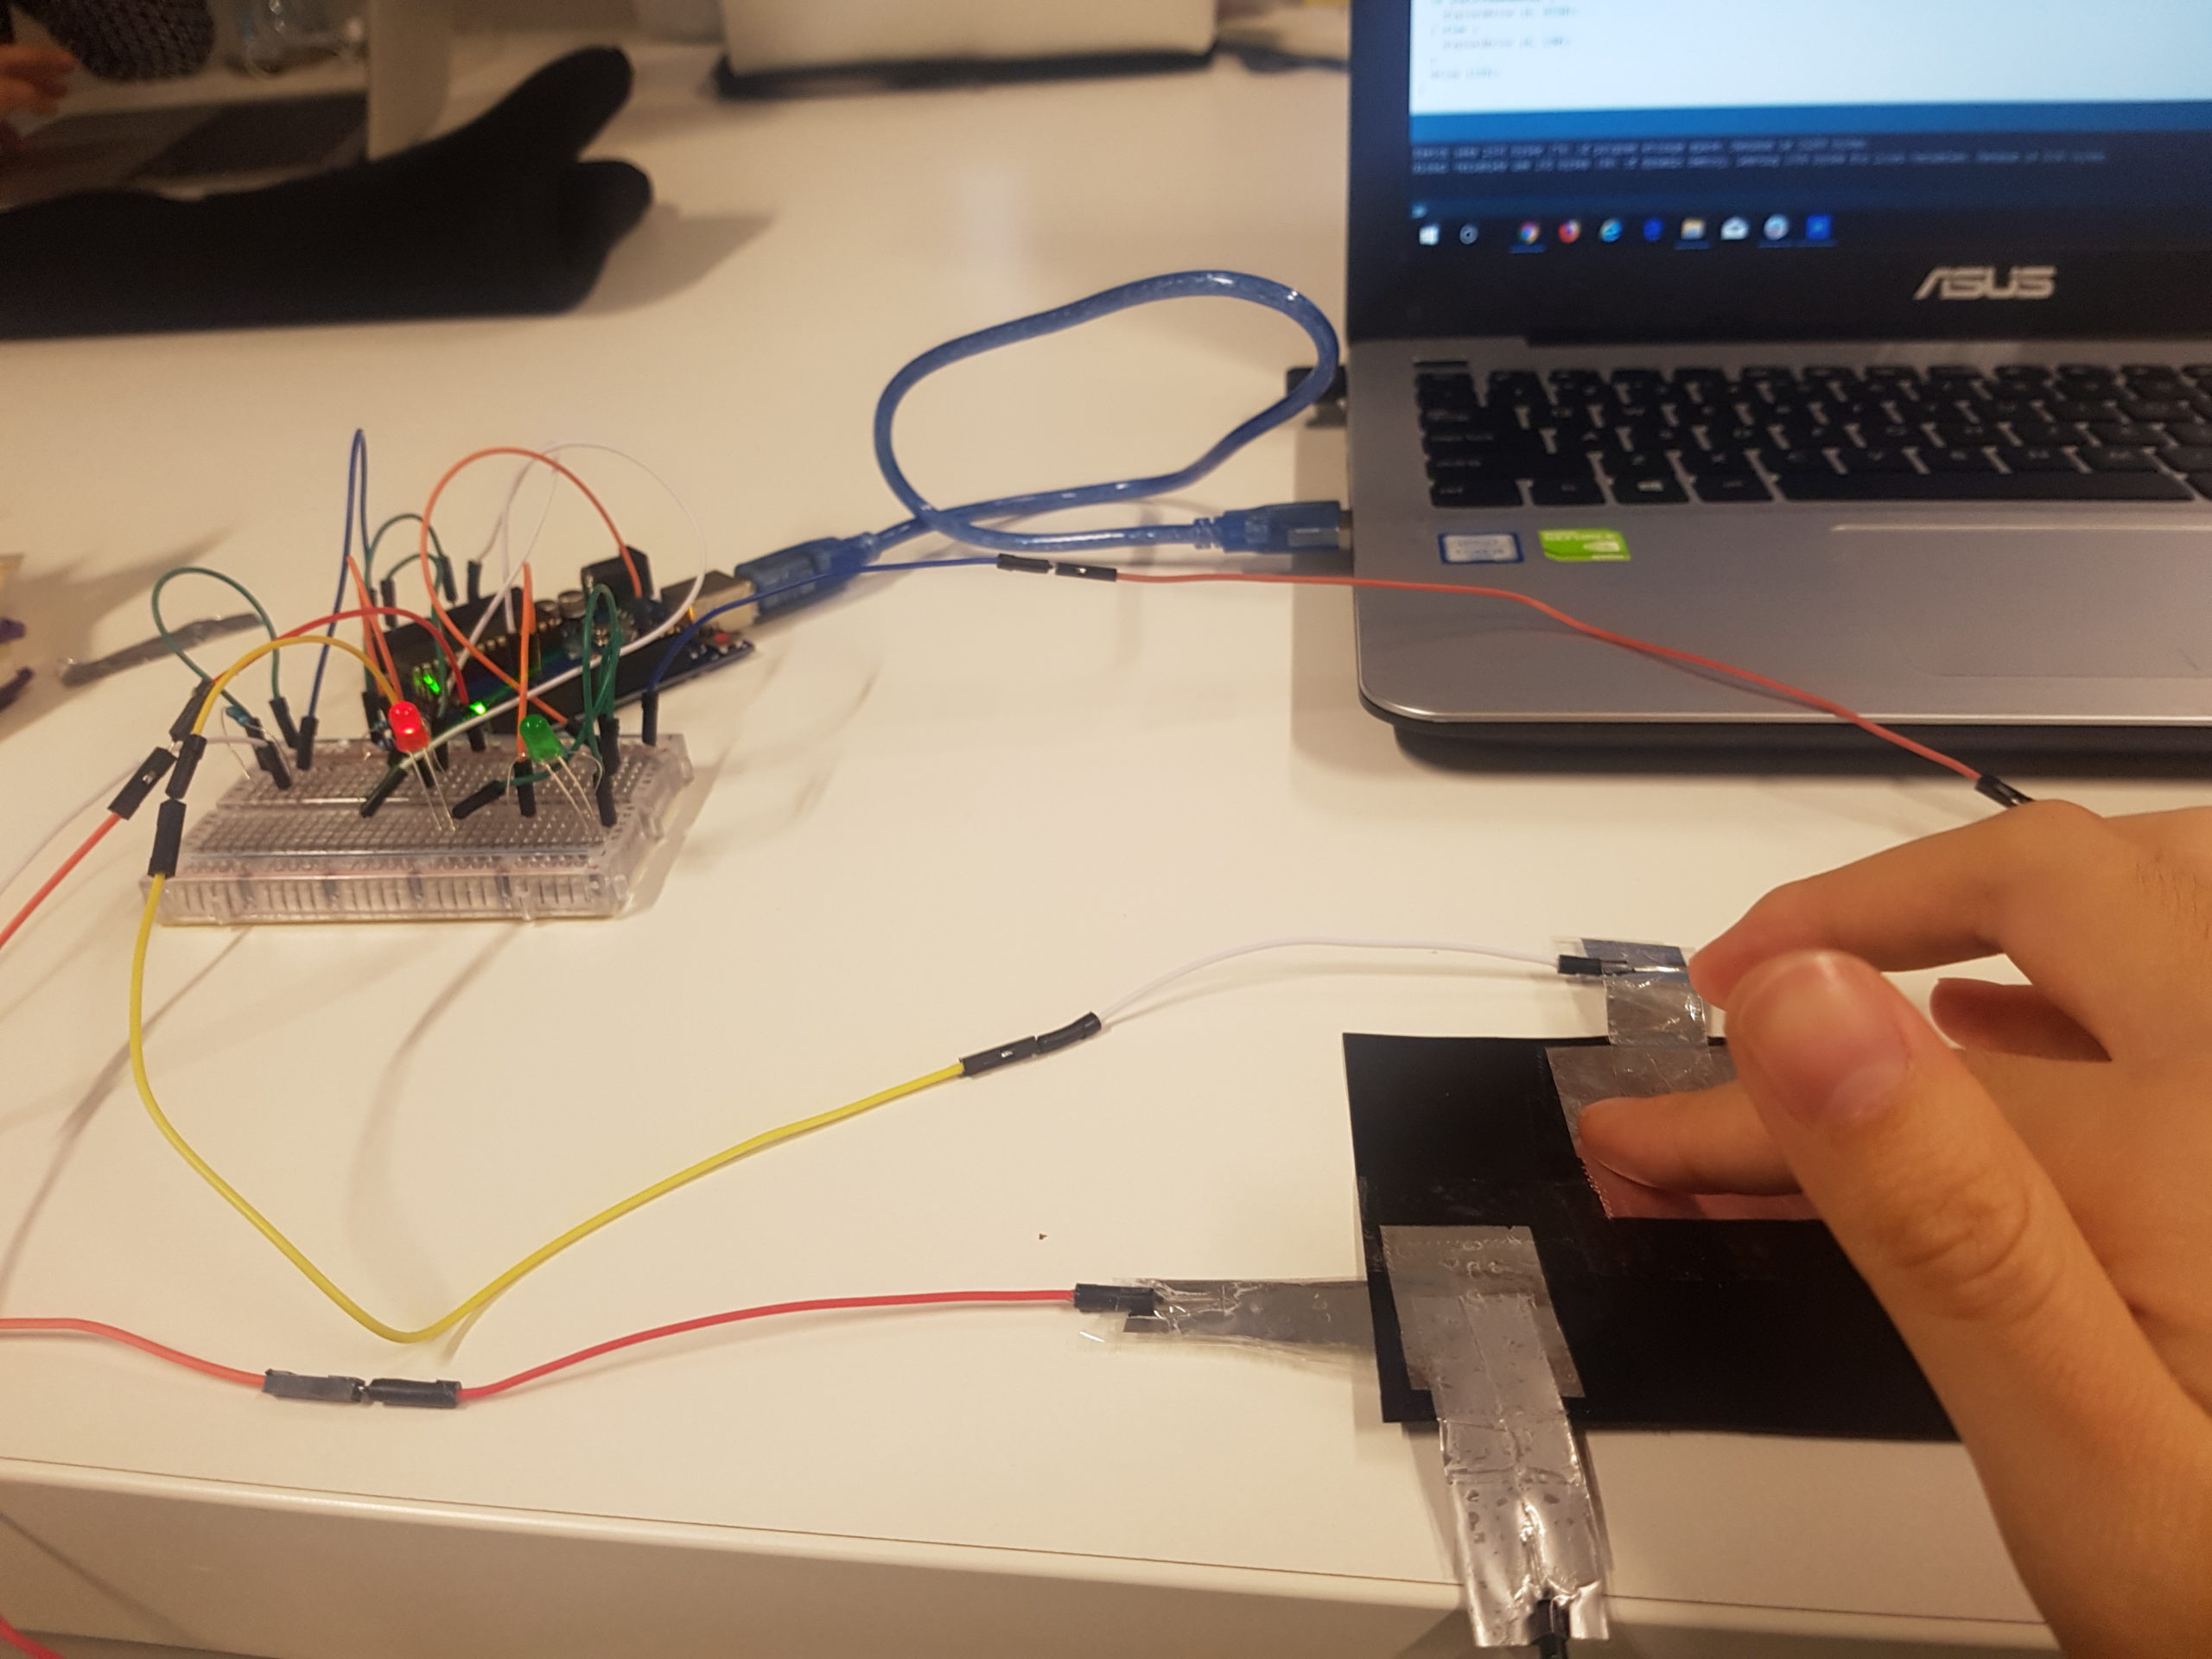 Testing of DIY touch sensors made of velostat, aluminium foil and tape